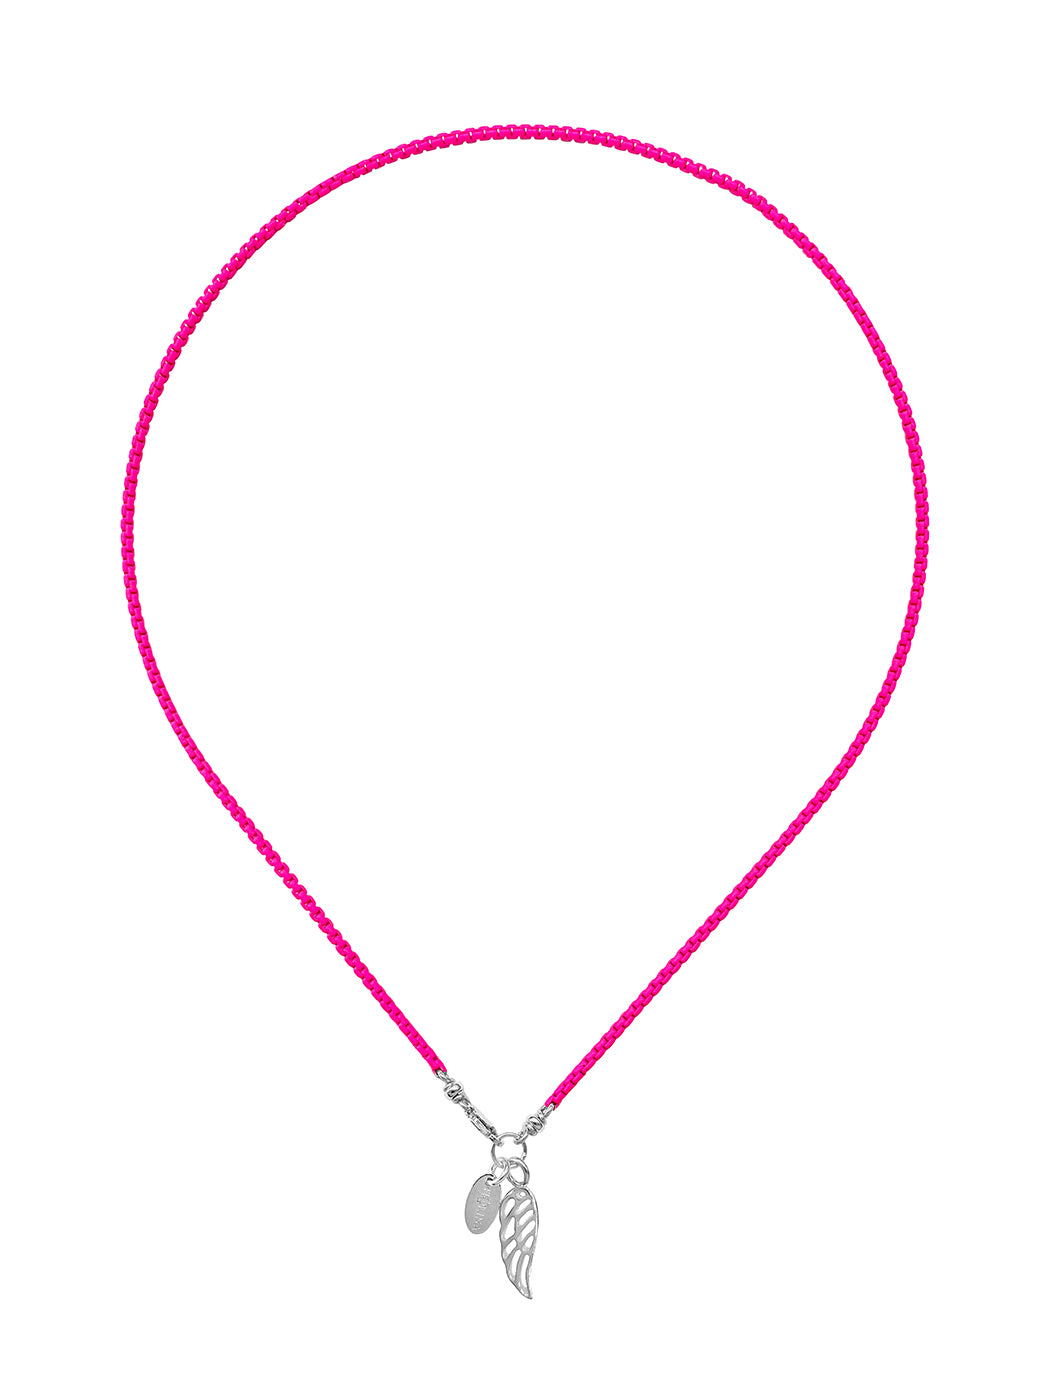 Fiorina Jewellery Wham Necklace Neon Pink Wing